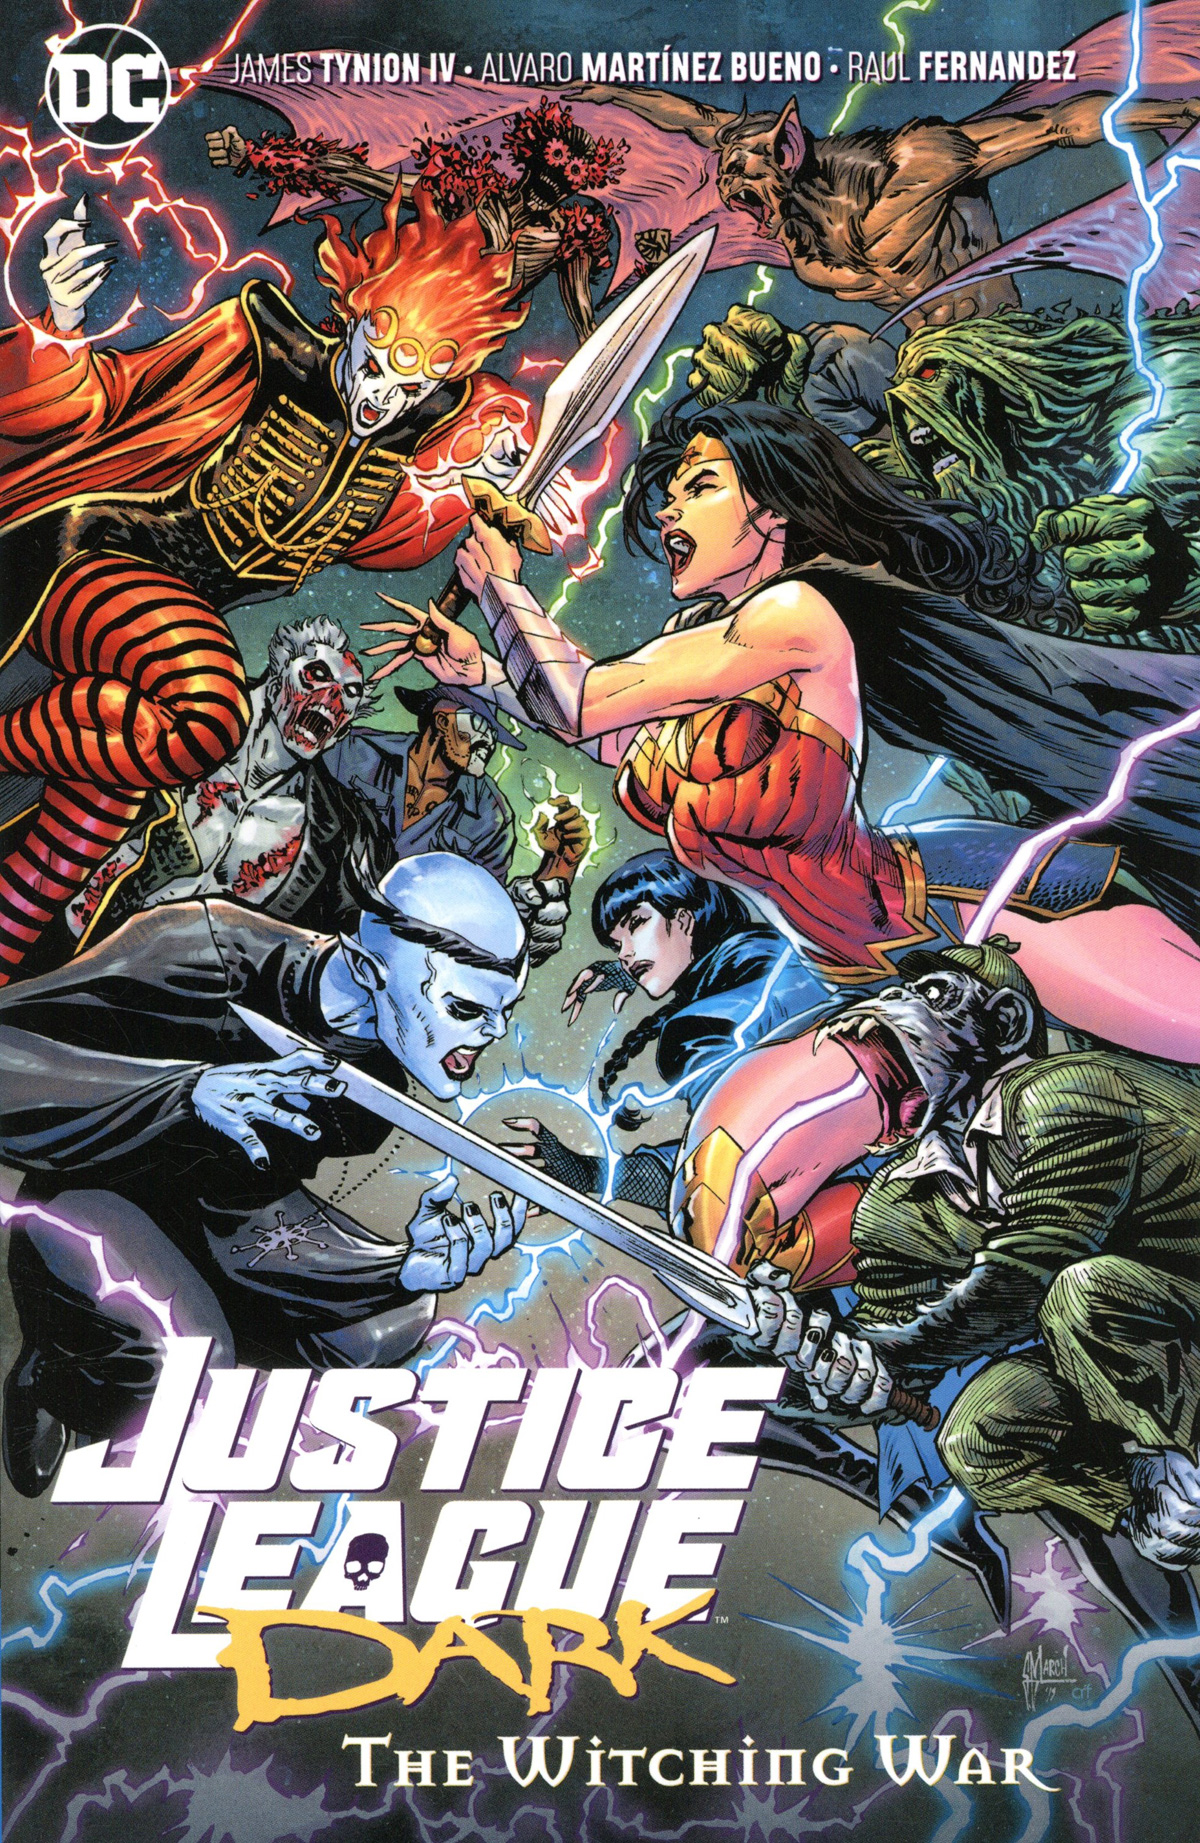 Justice League Dark (2018) Vol 3 The Witching War TP